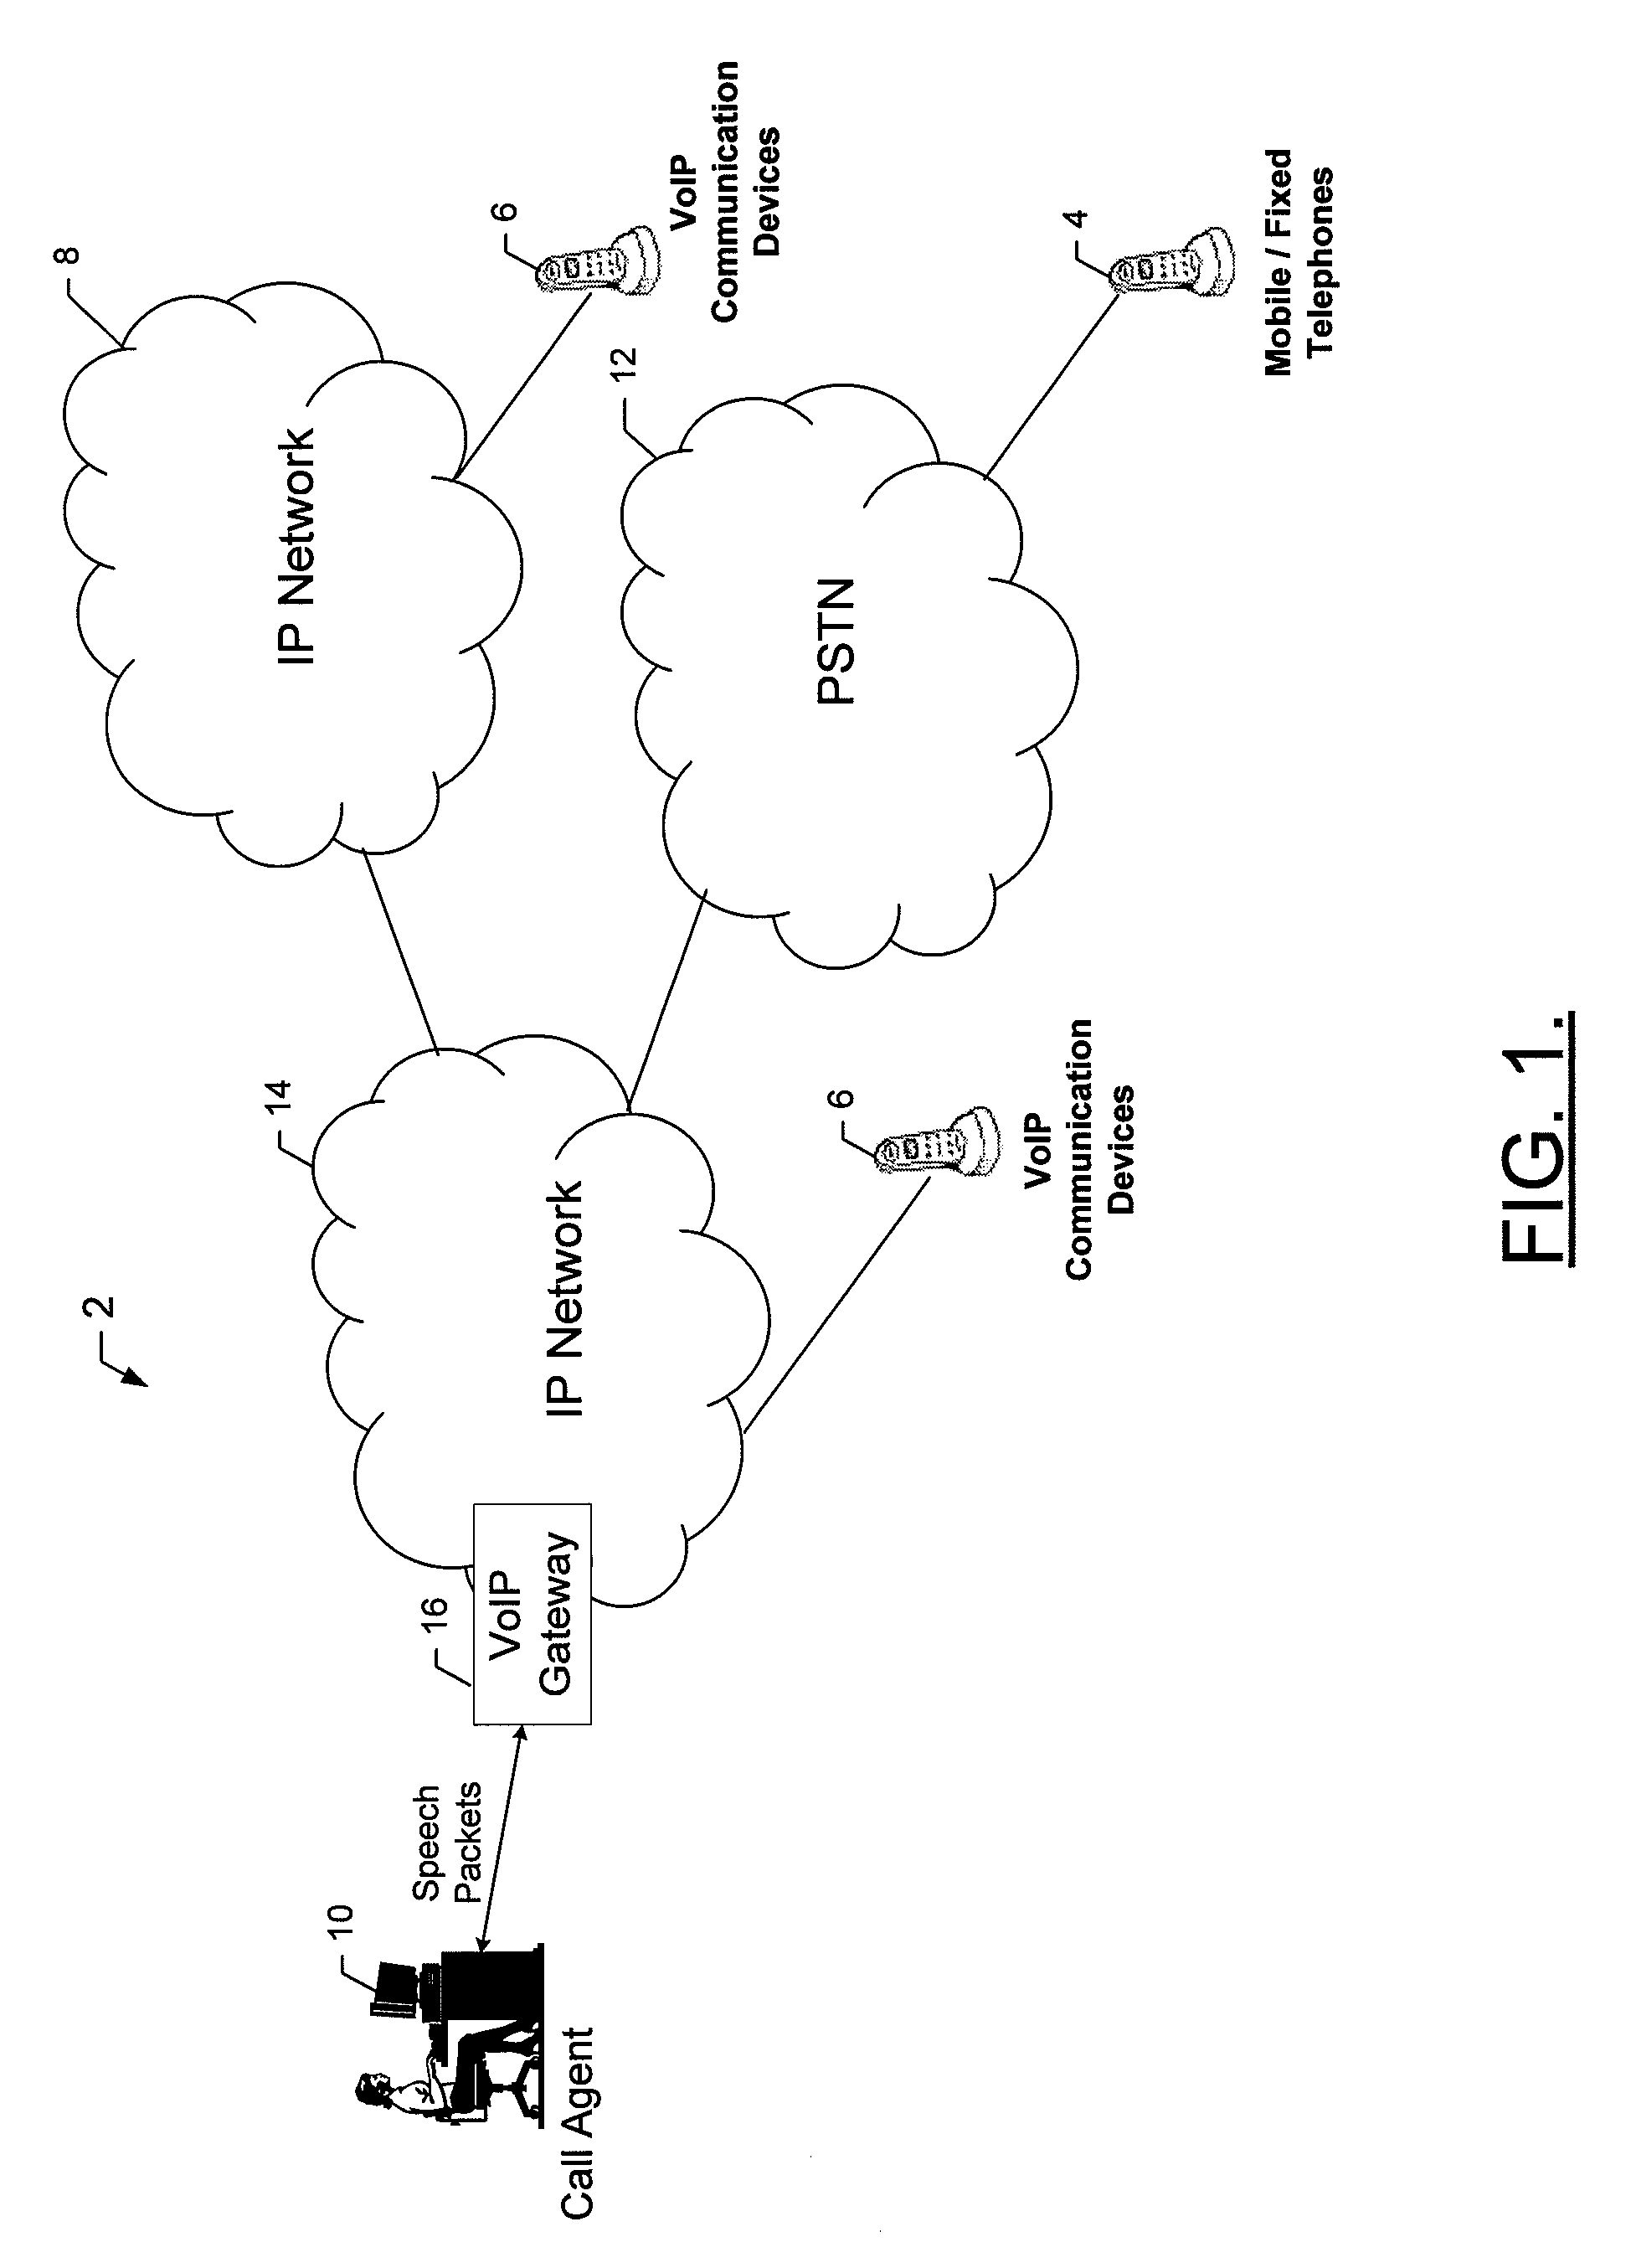 Method, computer program product, and apparatus for providing automatic gain control via signal sampling and categorization